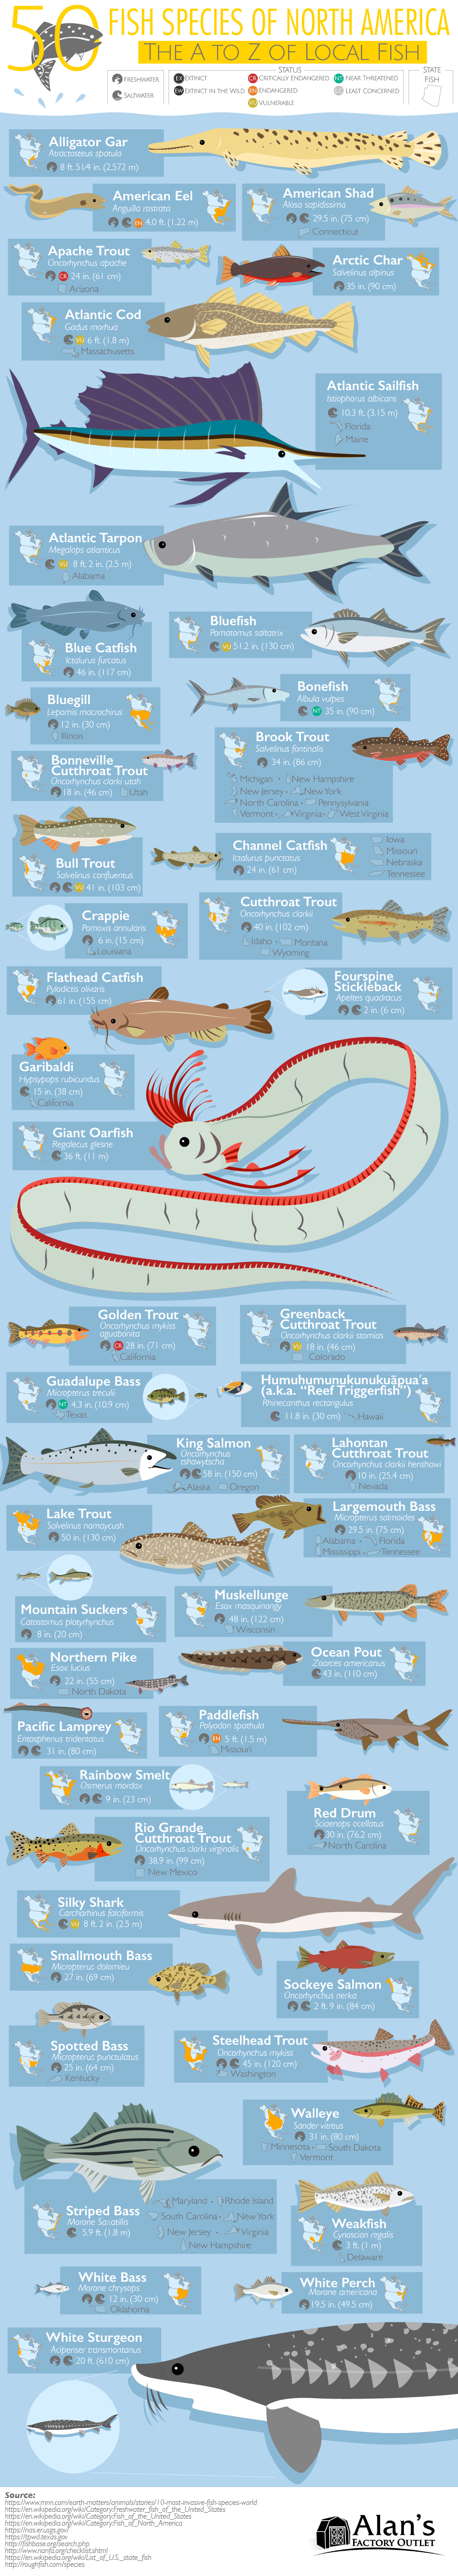 50 Fish Species of North America - The A to Z of Local Fish